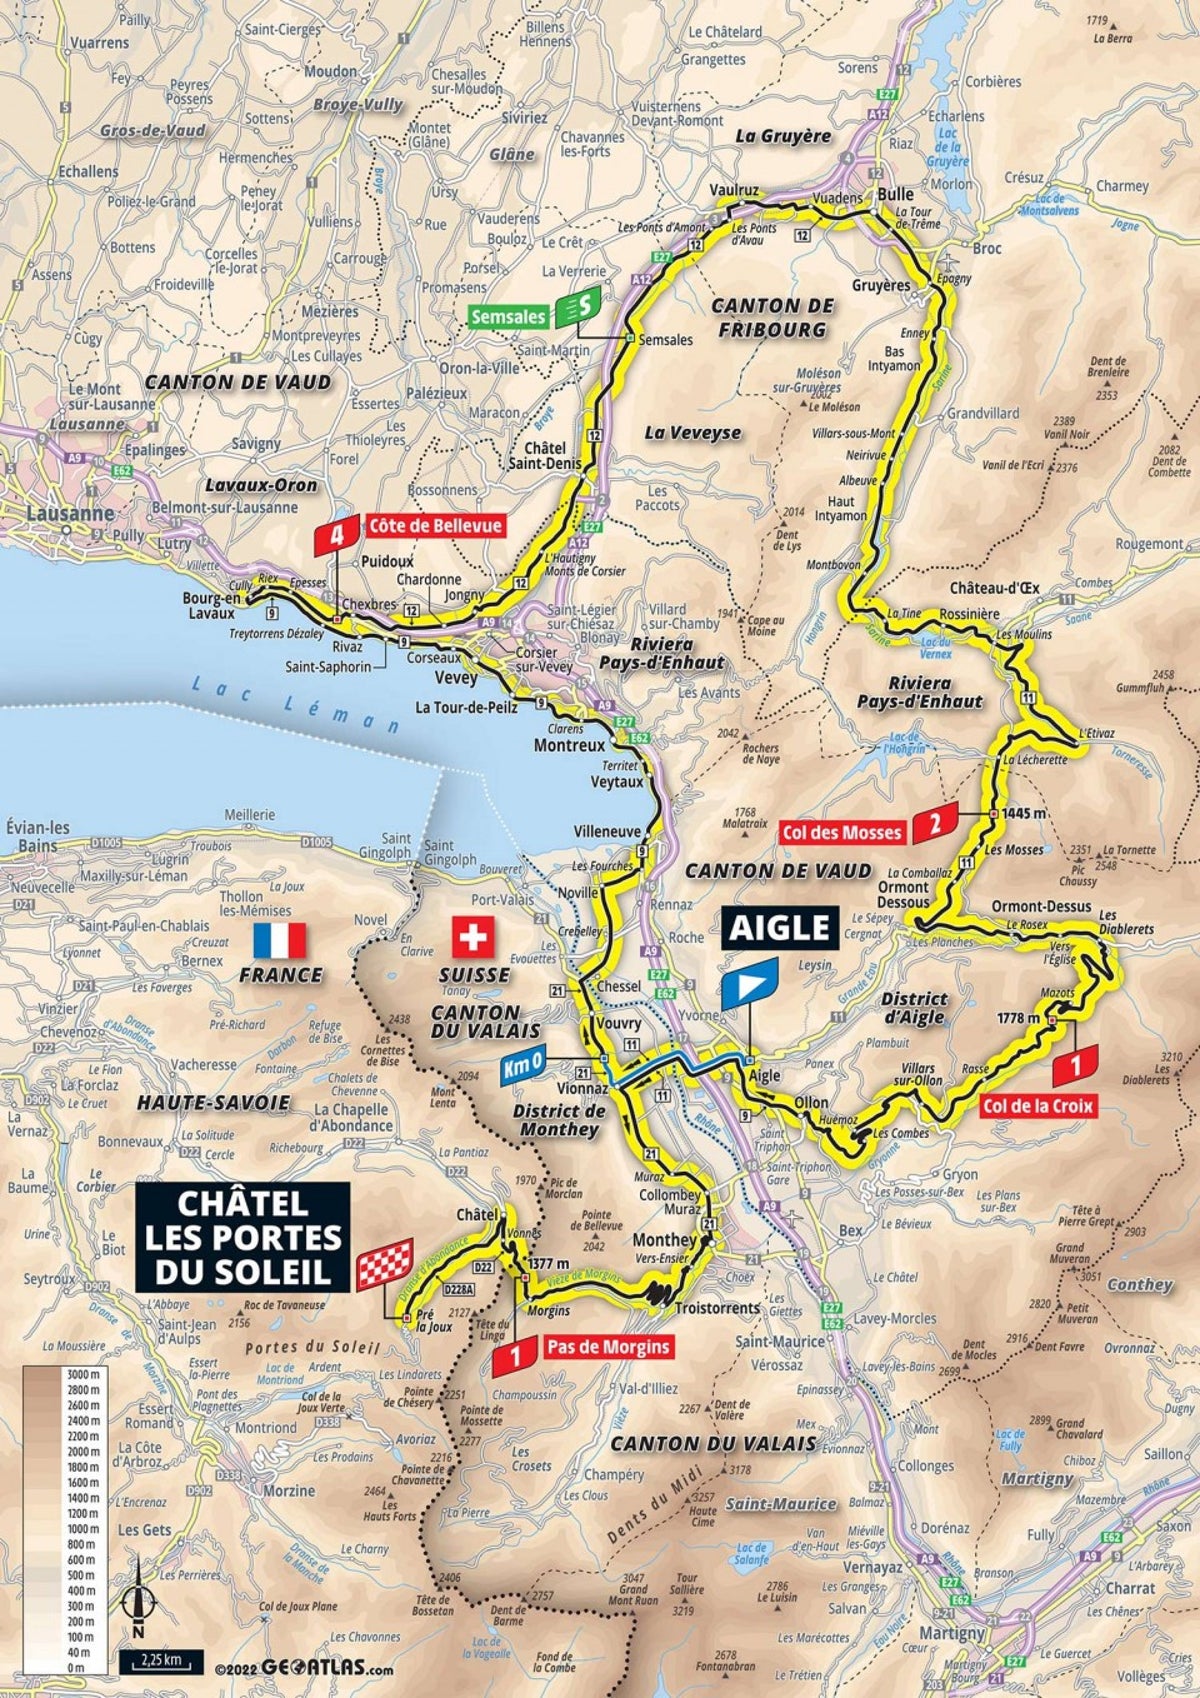 Tour de France 2022 stage 9 preview: Route map and profile of 193km road to the Alps today